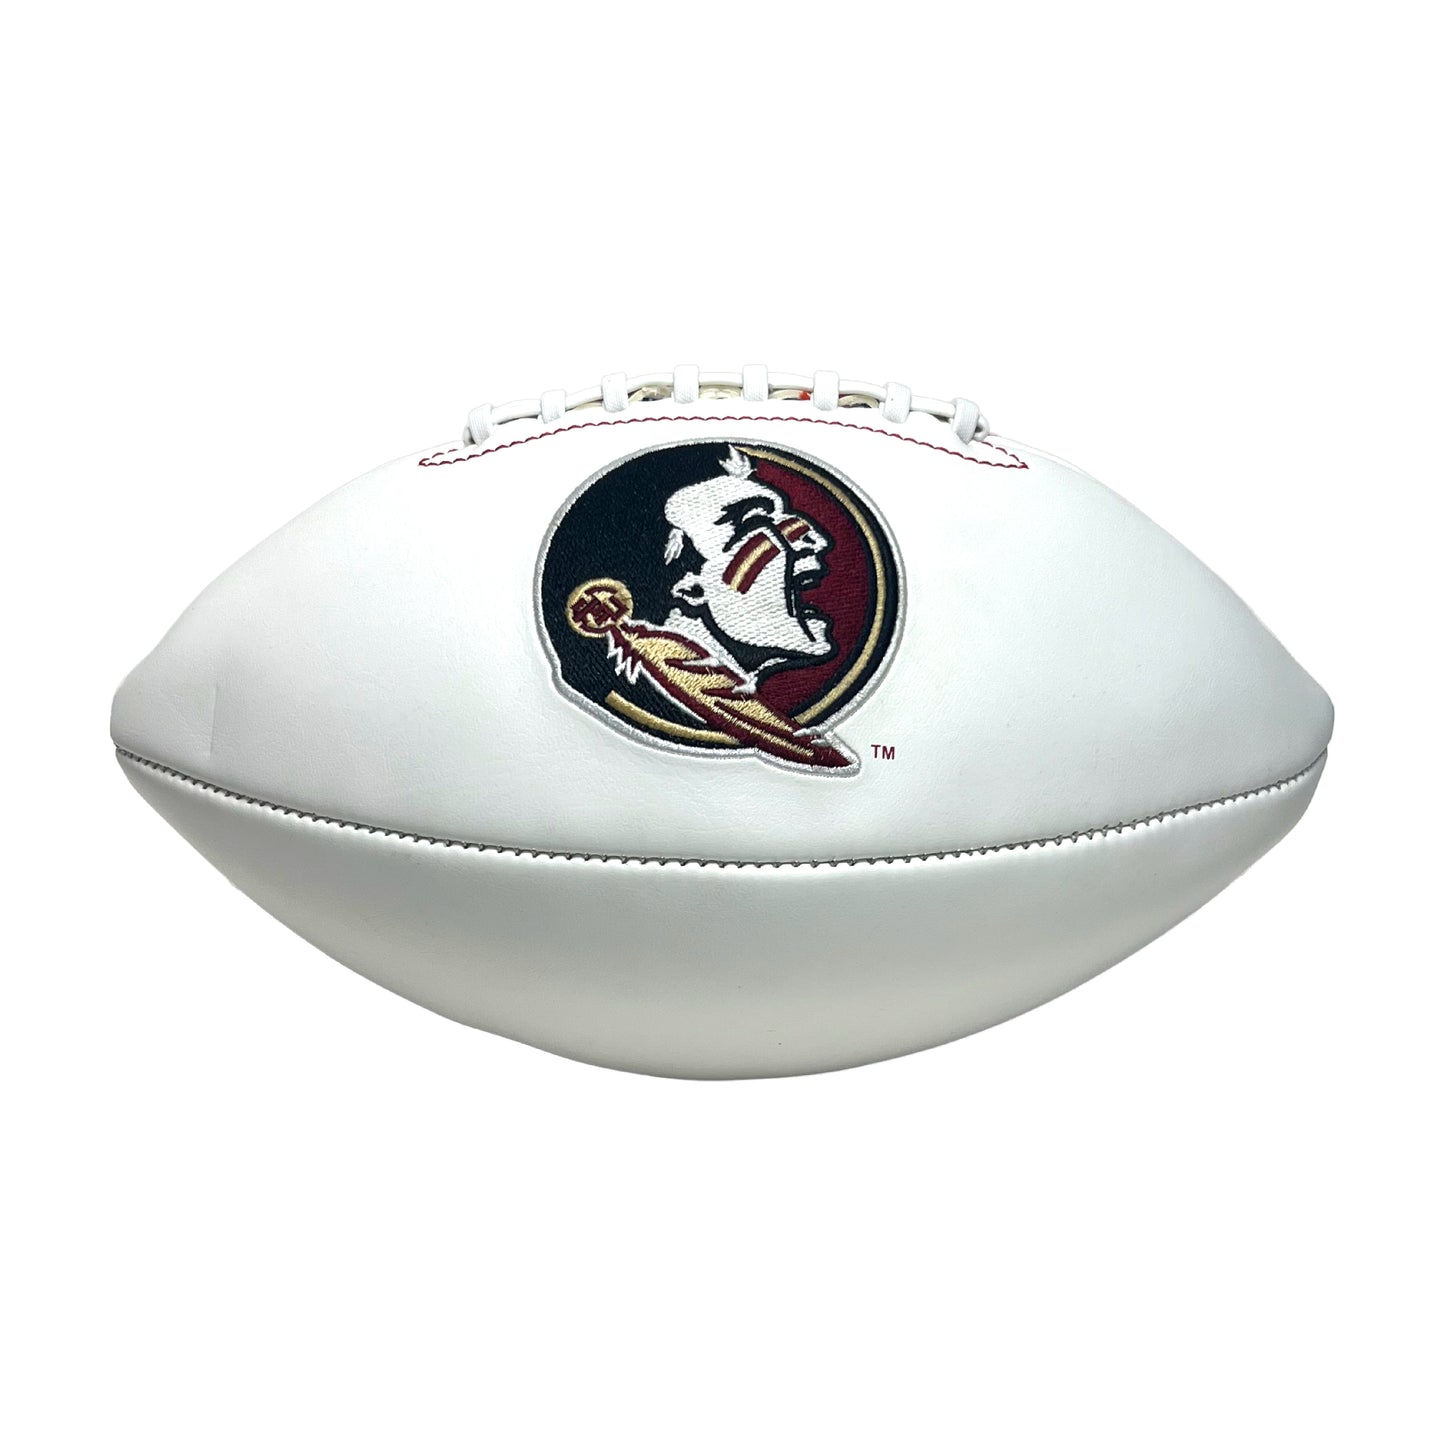 Florida State Embroidered Logo Signature Series Full Size Football